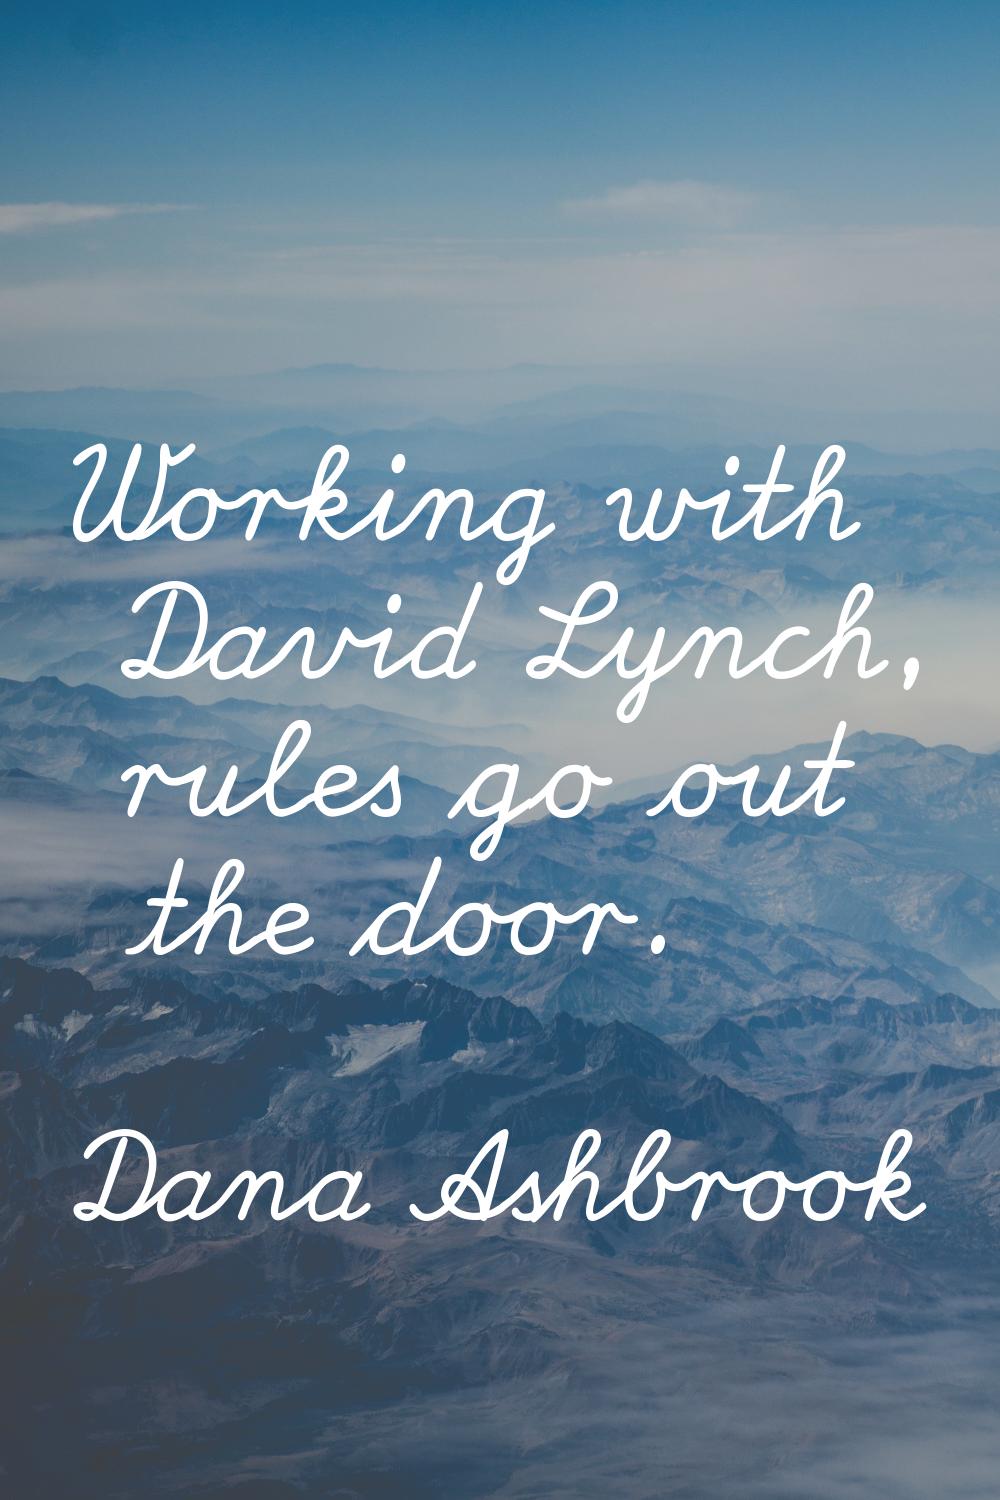 Working with David Lynch, rules go out the door.